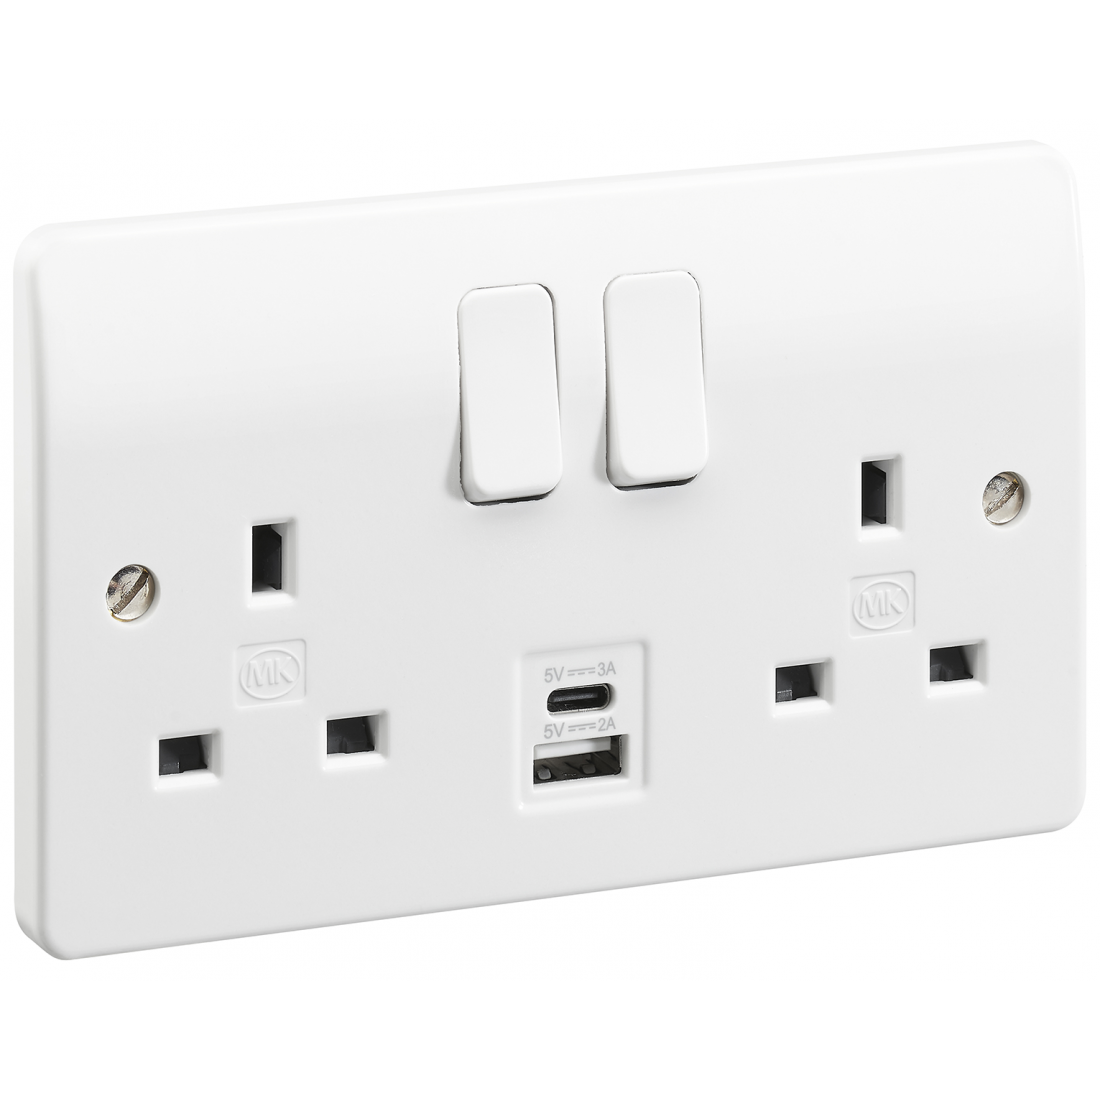 Mk double socket with usb